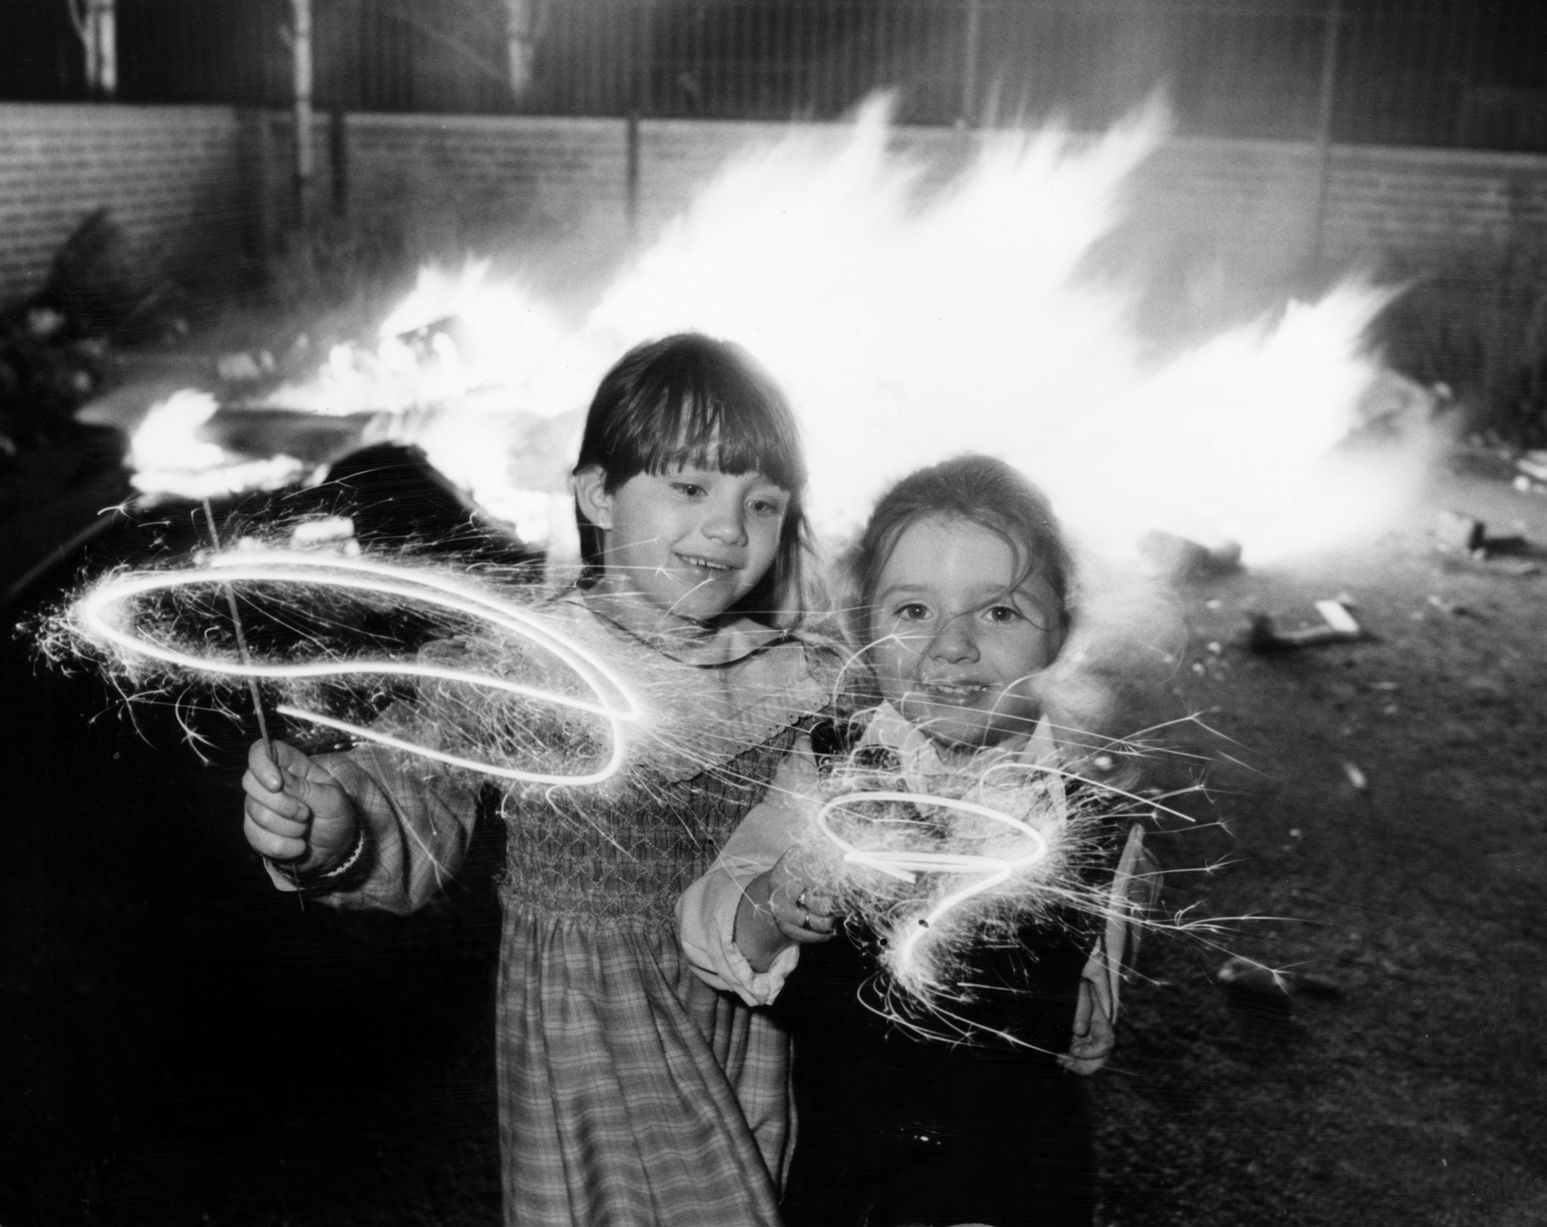 Clare aged 6 and Lindsay Gerard aged four (right) enjoying their sparklers at an impromptu bonfire party in Kensington, Liverpool, 1986